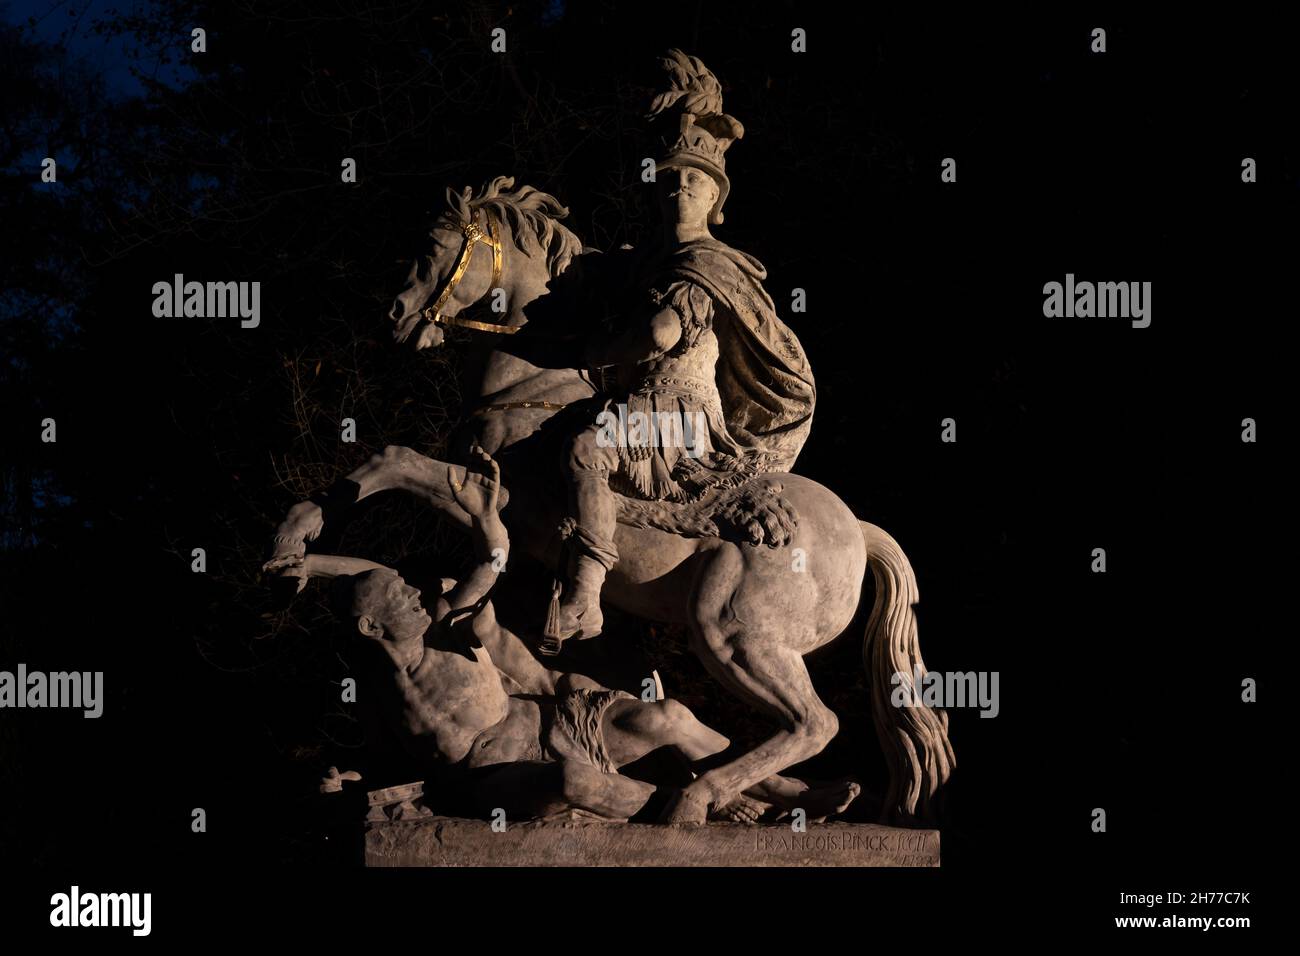 King Jan III Sobieski monument illuminated at night in city of Warsaw, Poland. Baroque equestrian statue from 1788. Stock Photo